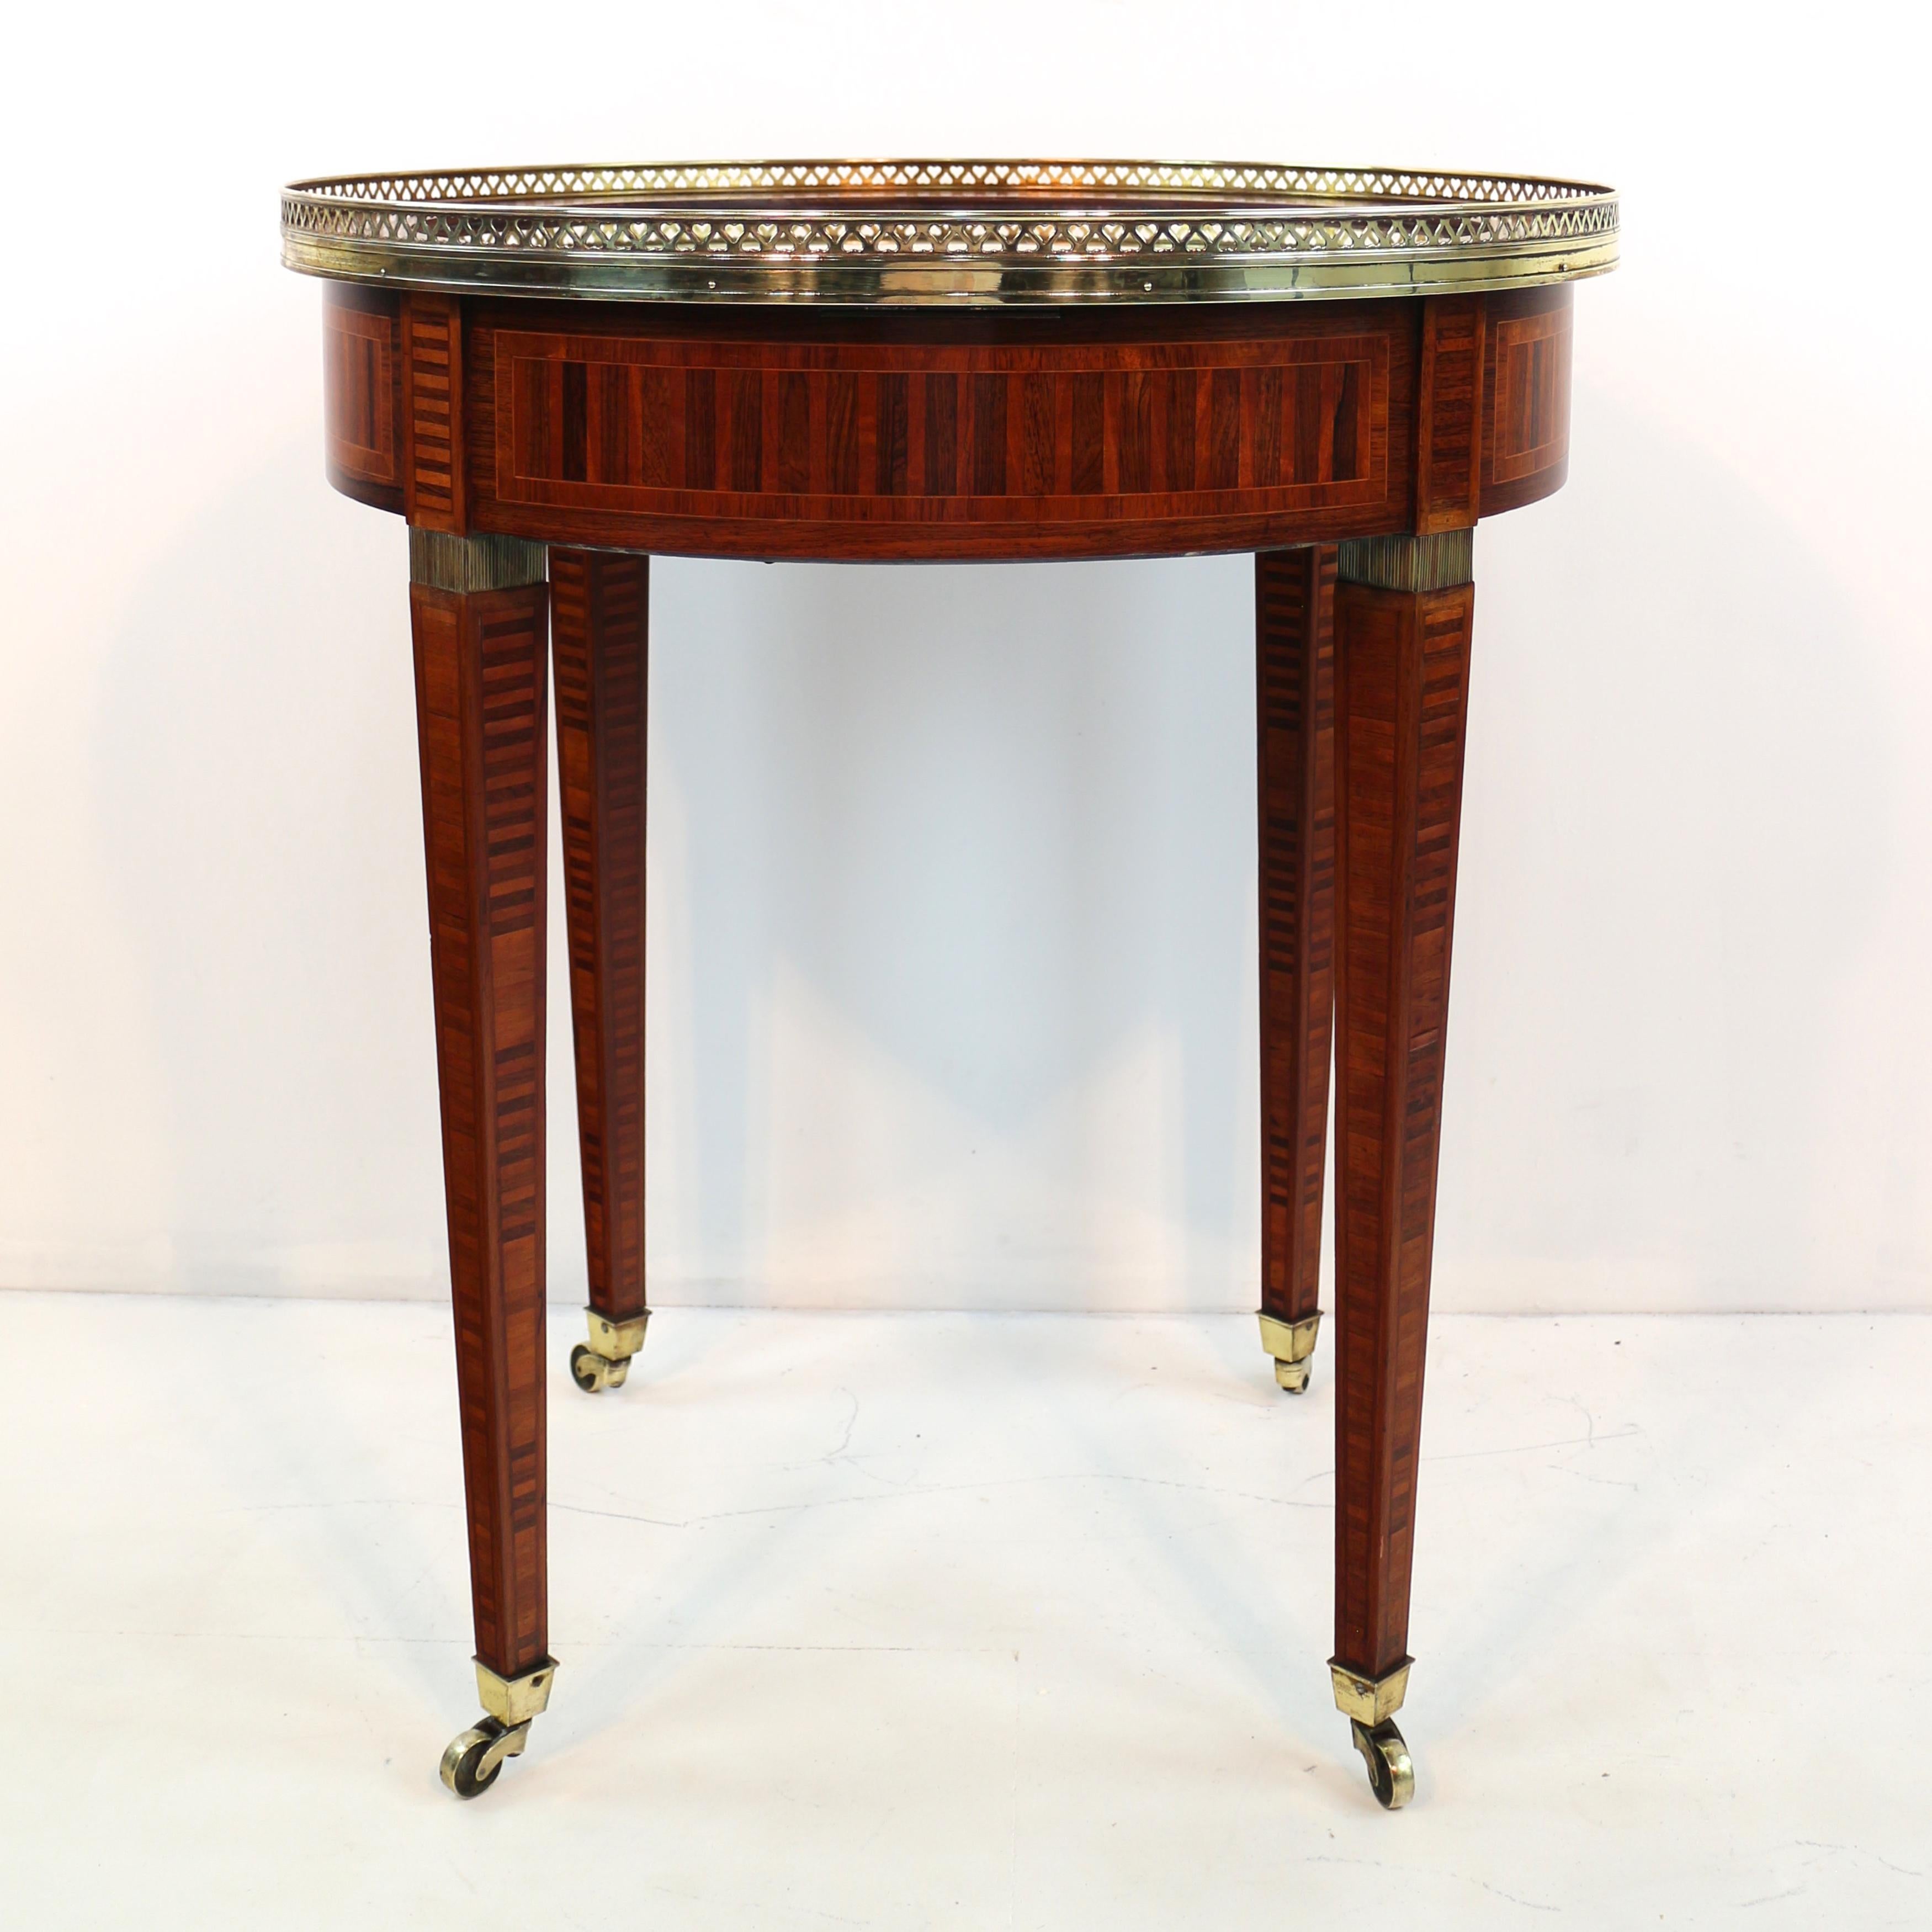 Antique English Victorian Sheraton Revival Rosewood & Parquetry Bijouterie Table For Sale 12